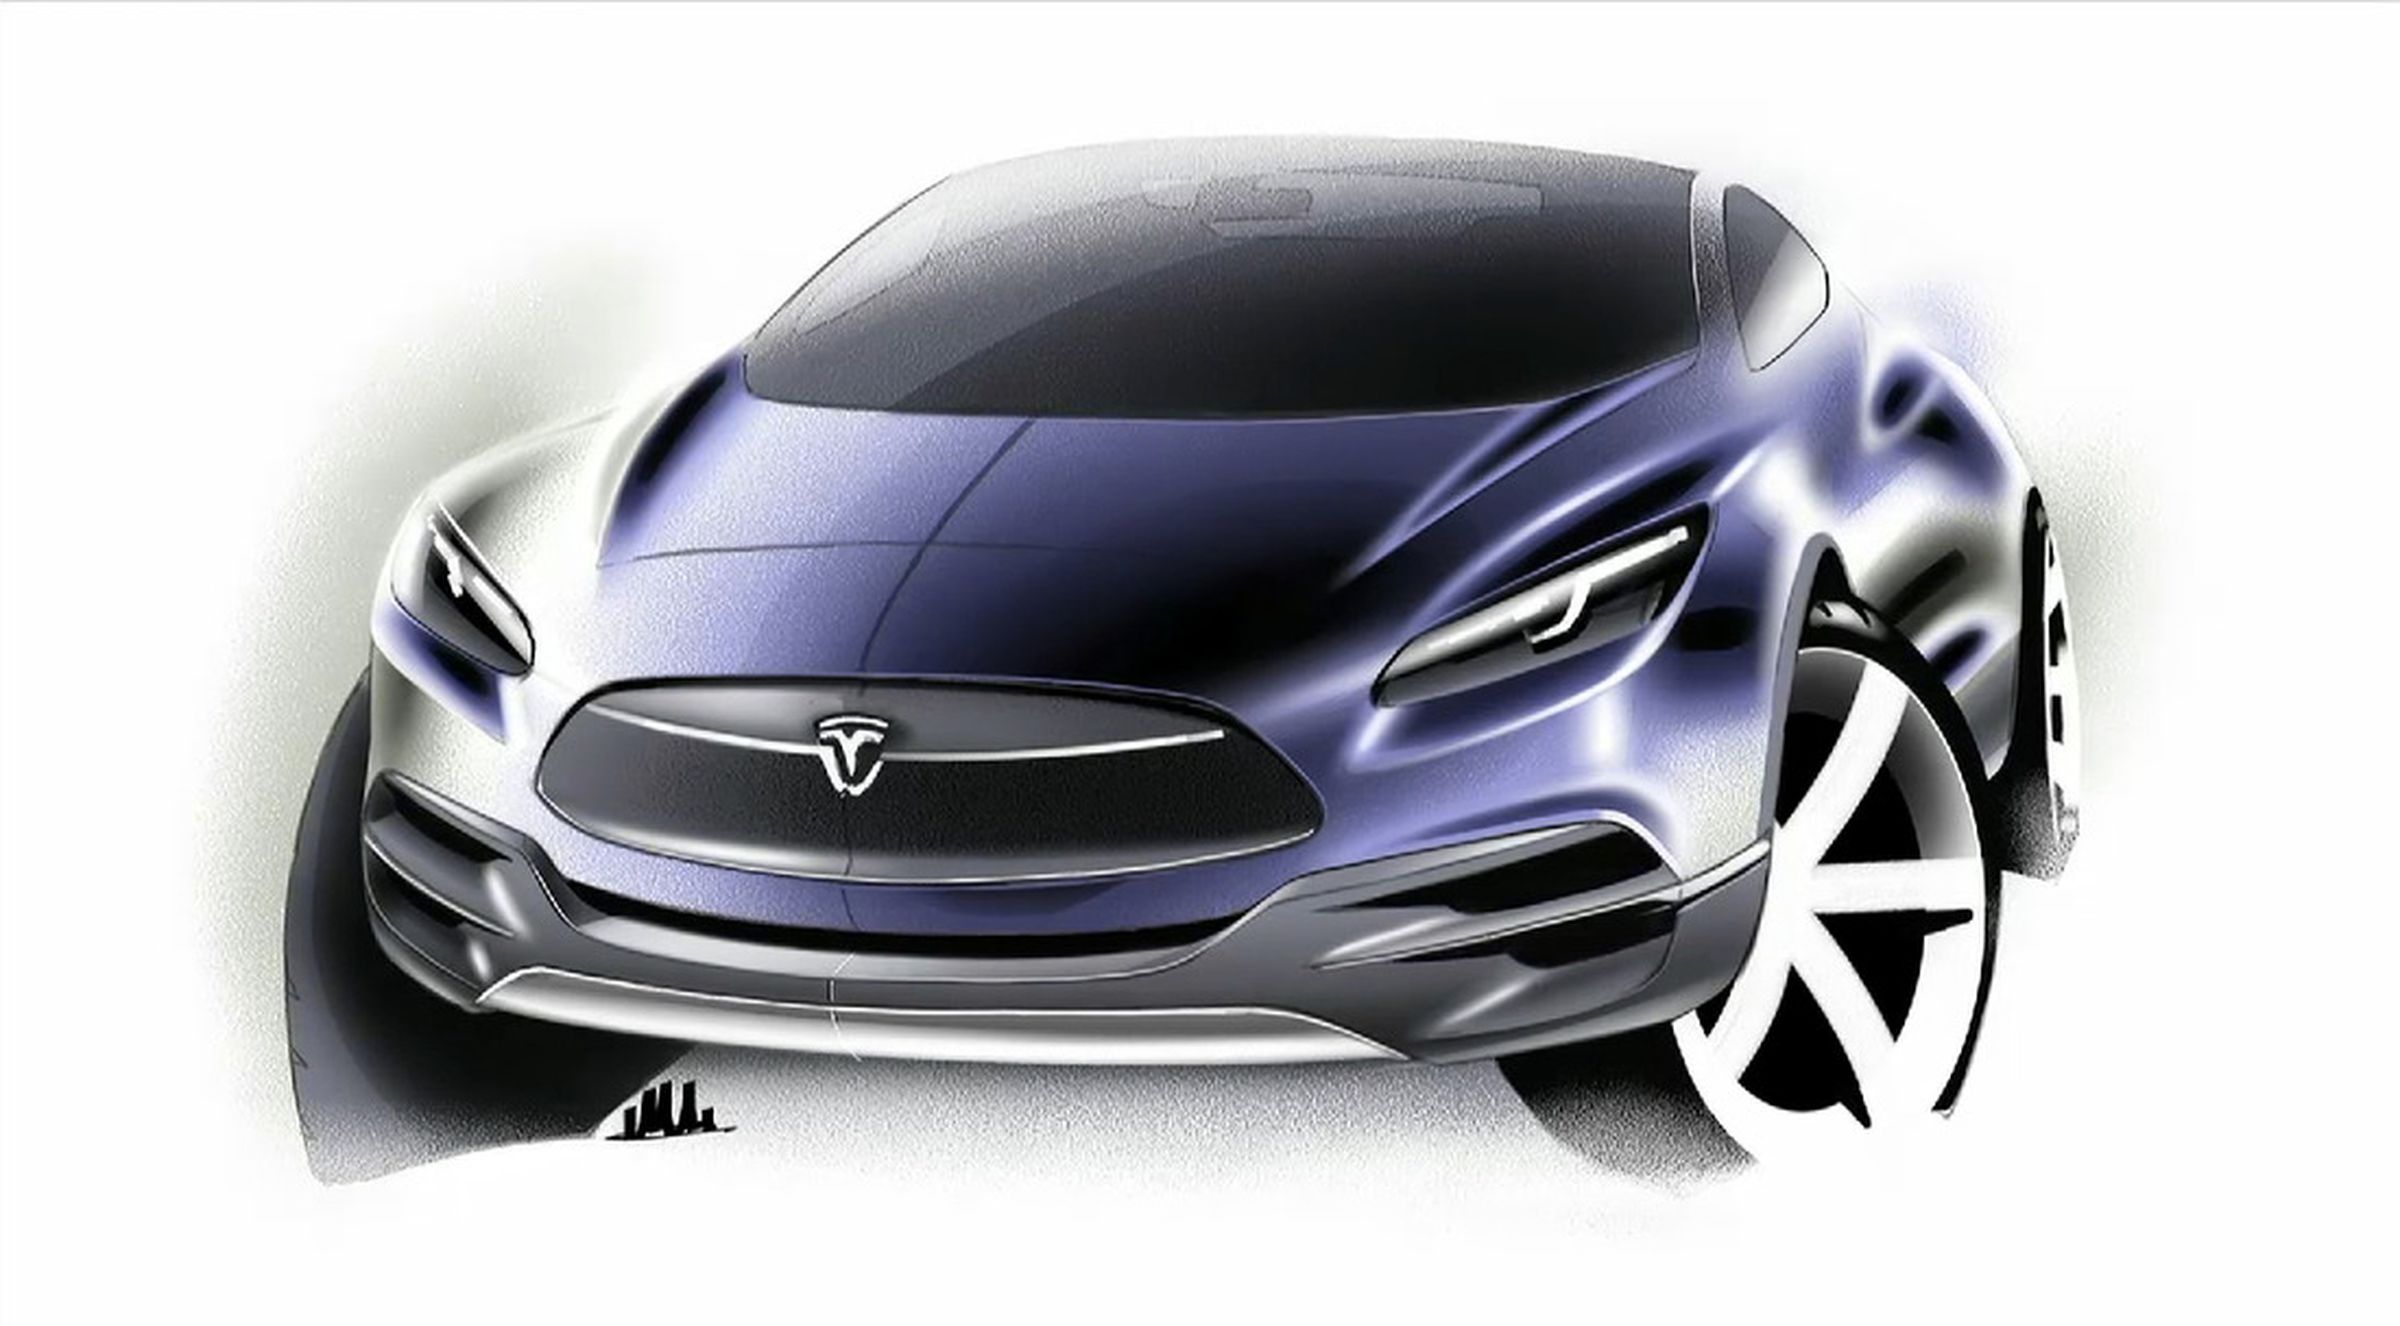 Tesla Model X unveiling event and concept drawing images